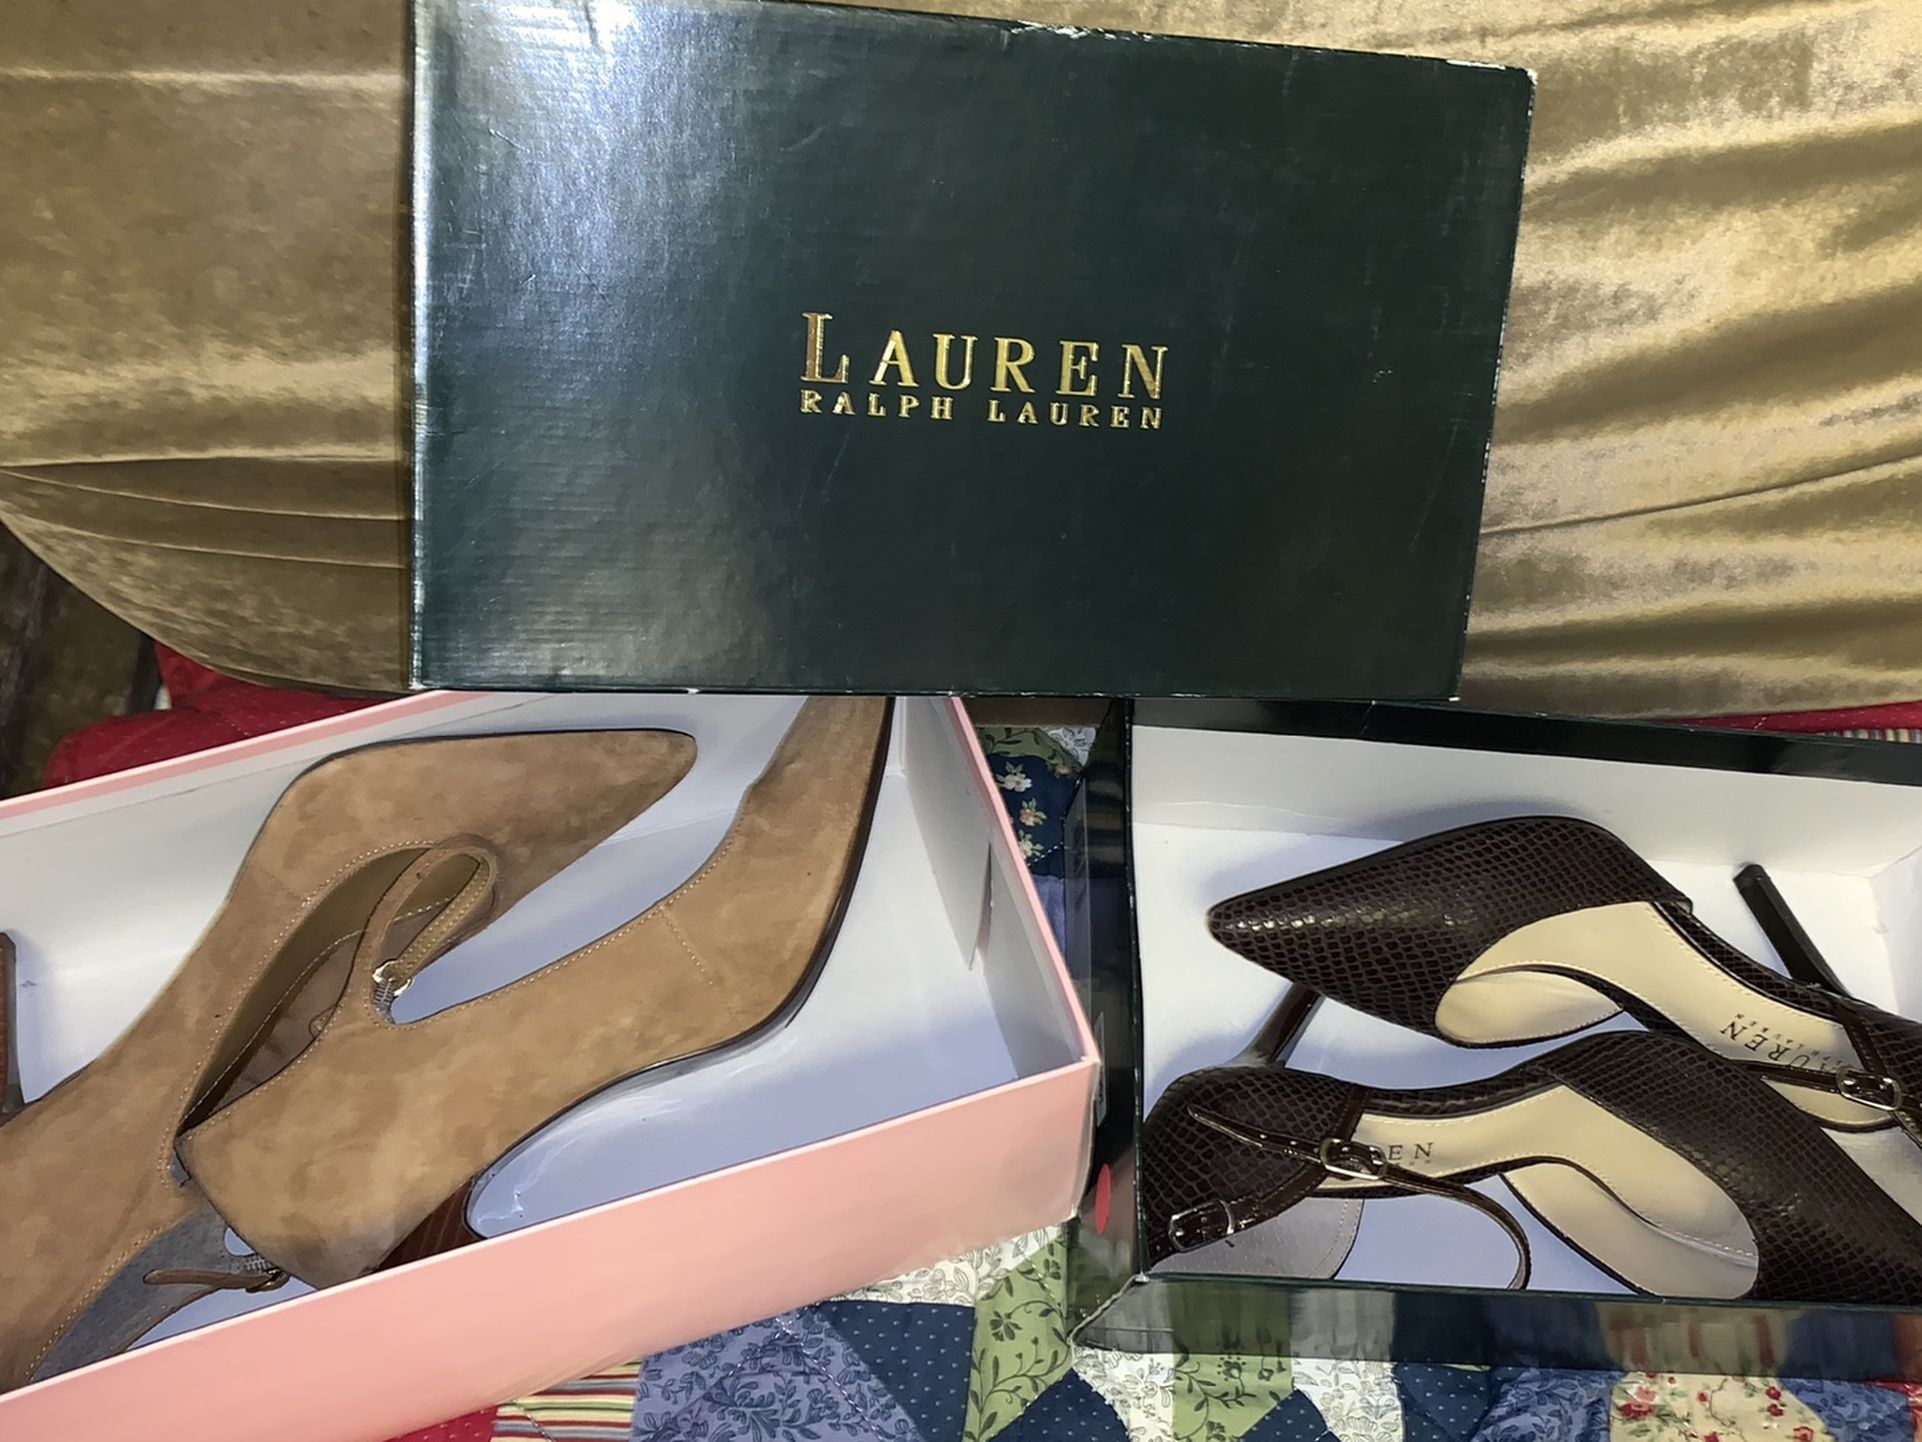 2 PAIRS OF RALPH LAUREN WOMAN’S SHOES, BOTH SIZE 6.5 BRAND NEW